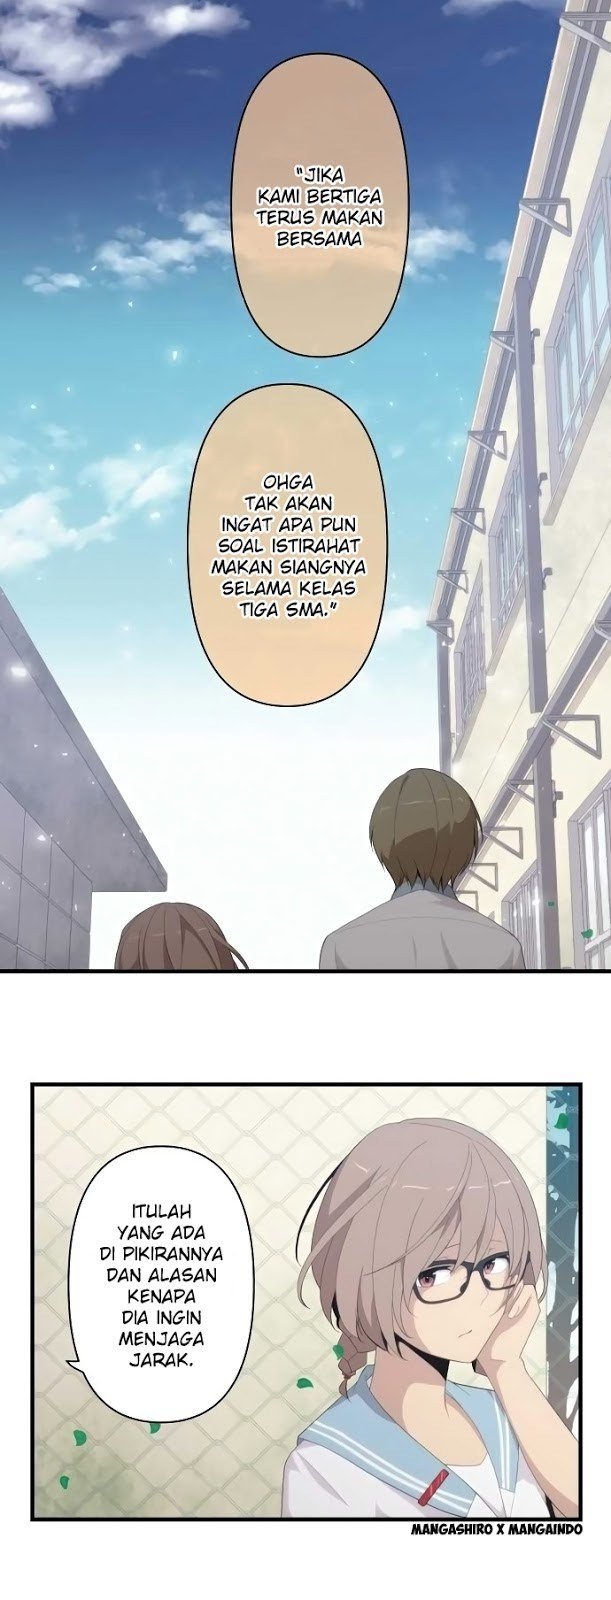 ReLife Chapter 125